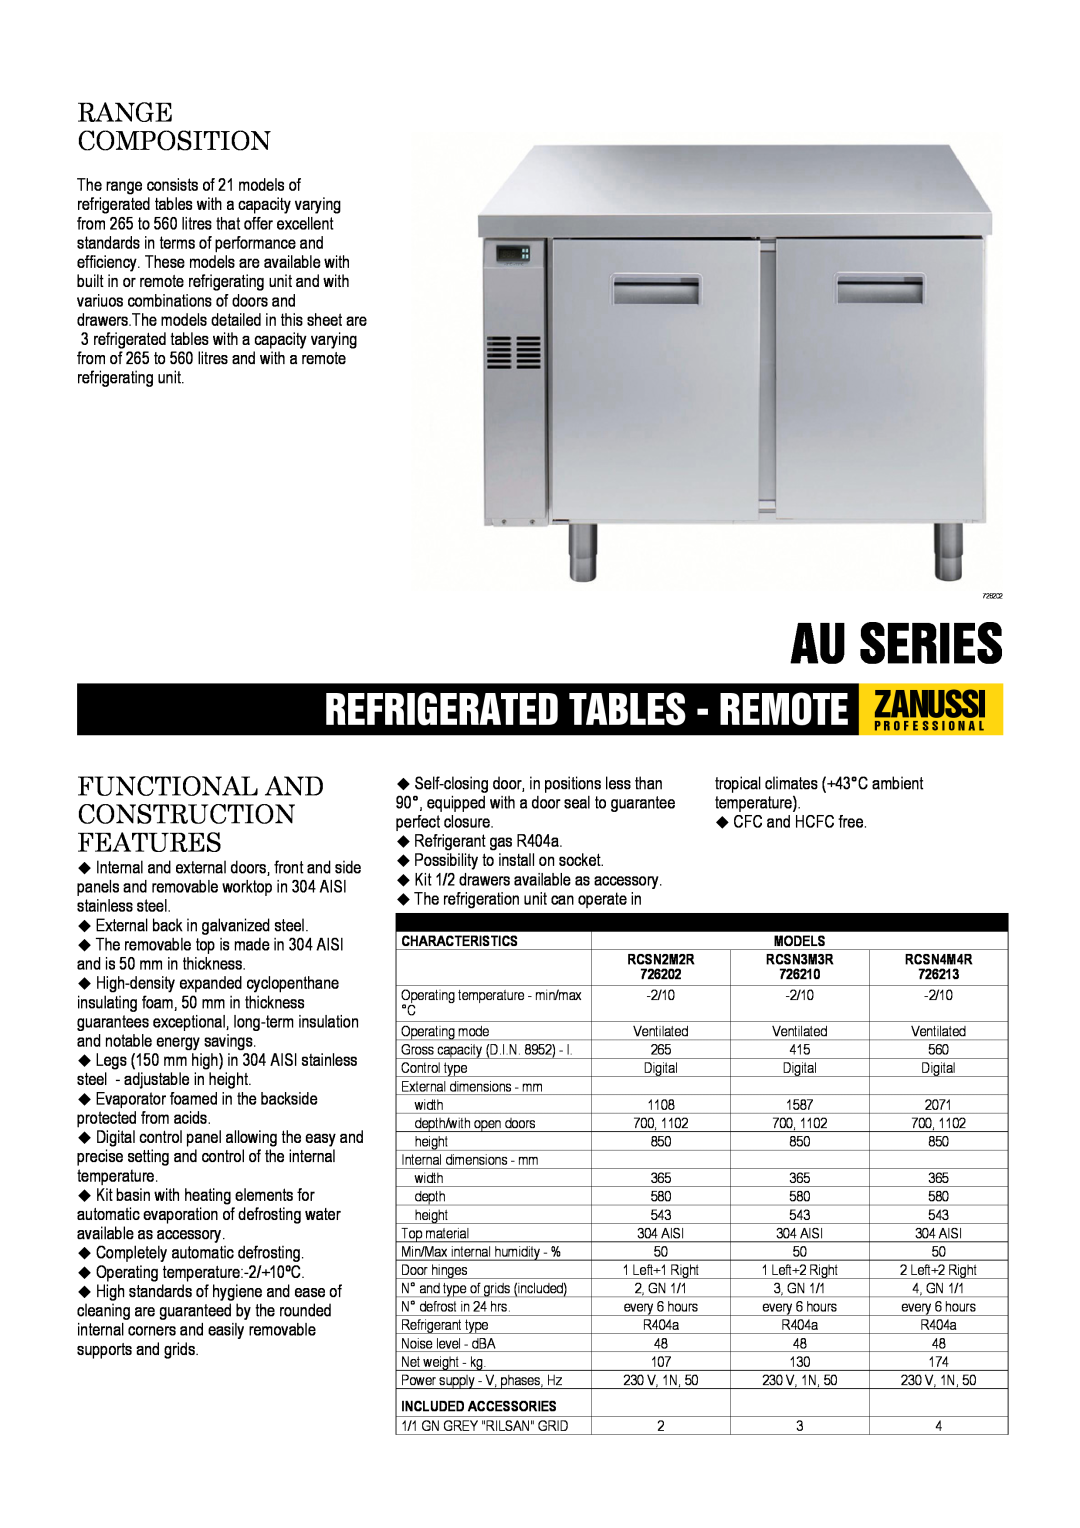 Zanussi 726210, 726213, 726202, RCSN4M4R dimensions Au Series, Range Composition, Functional And Construction Features 